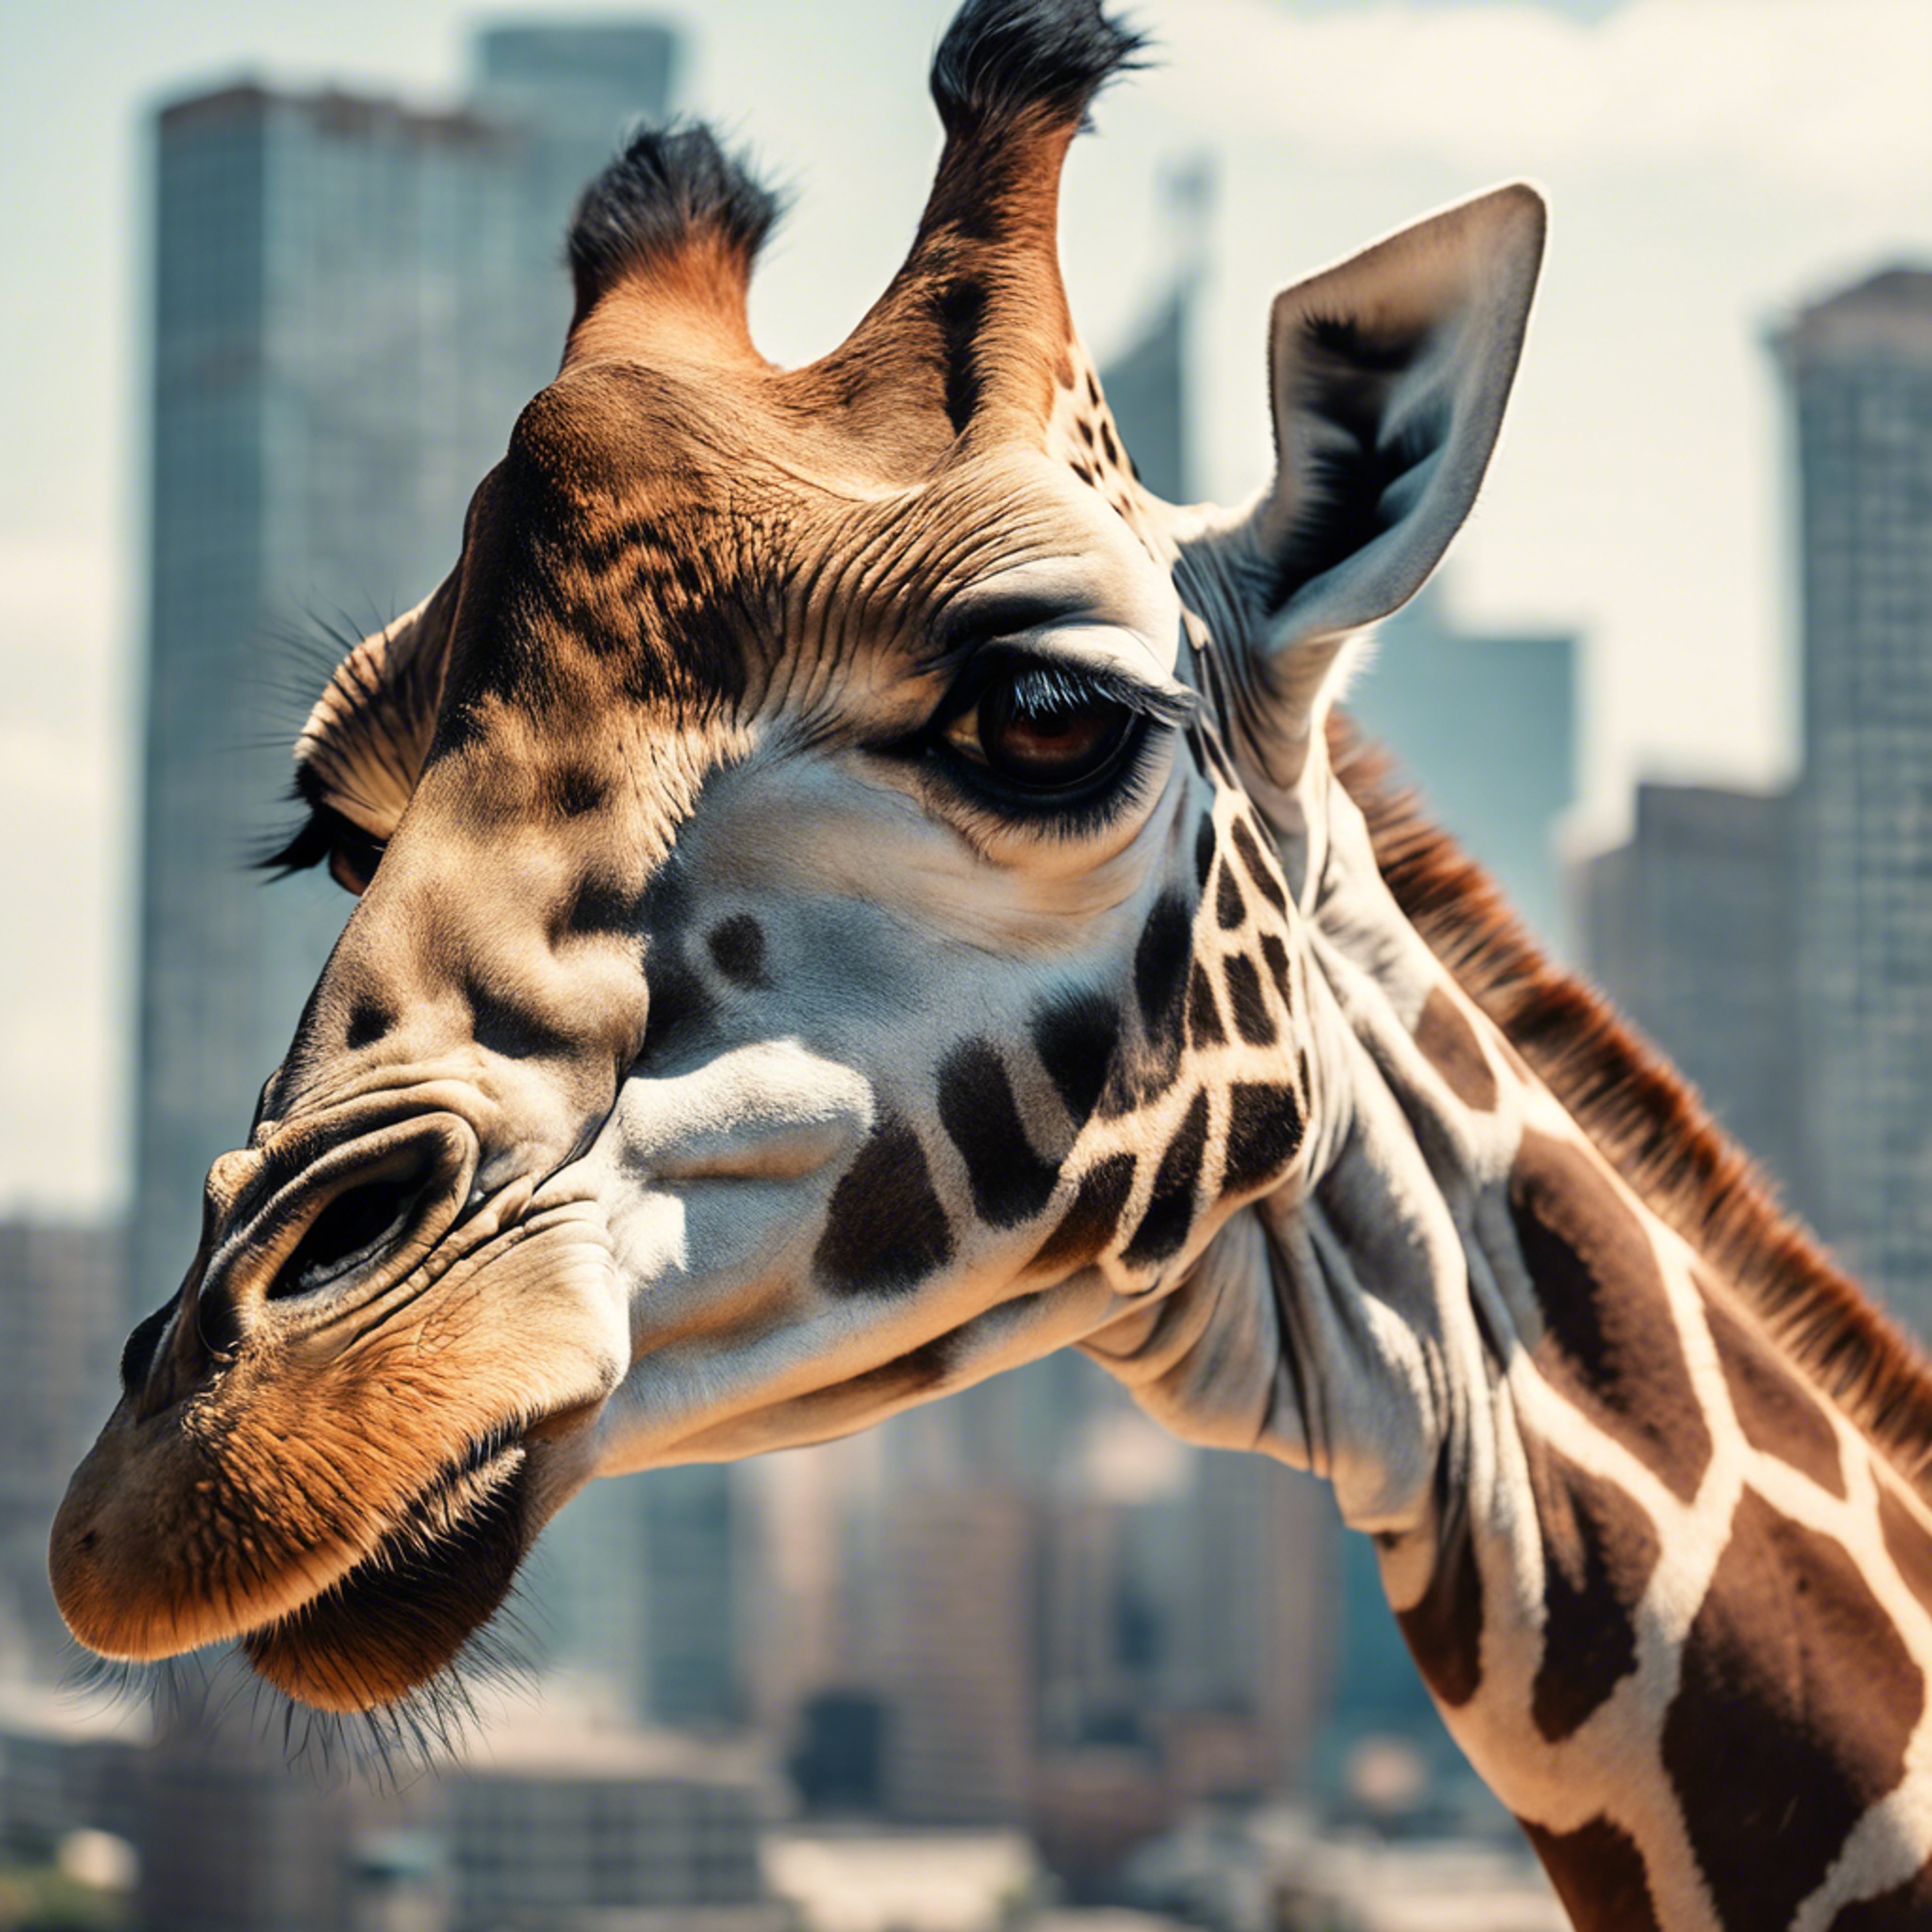 Illustration of a giraffe with a cityscape reflected in its eye. Tapeta[07df3c2b5cb24fb9a513]